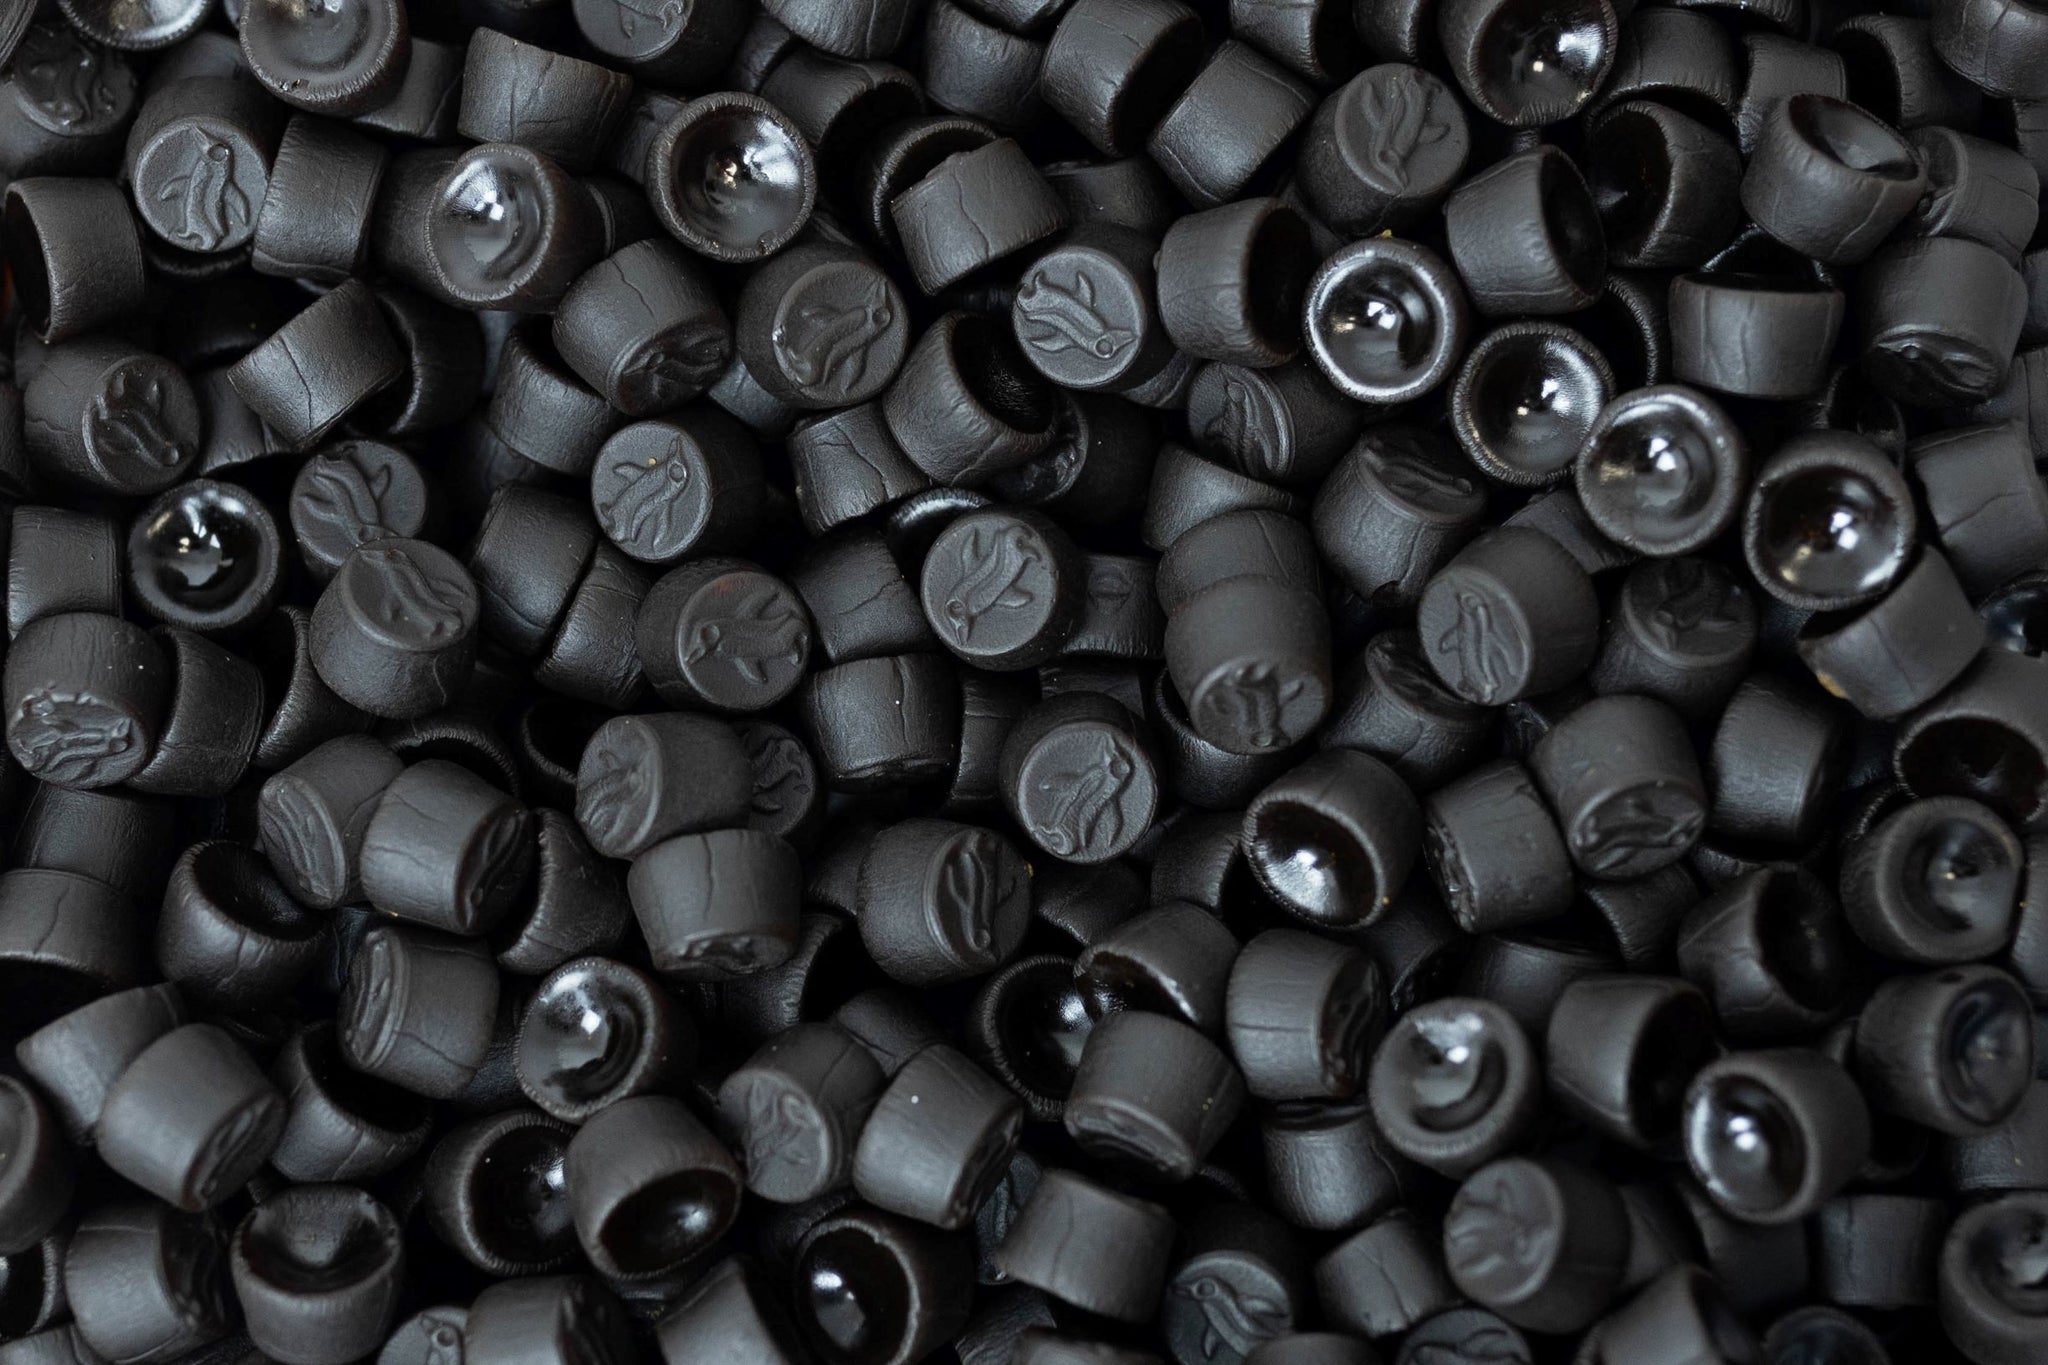 Saltpastiller Licorice Pastilles) - Sweetish Candy- A Swedish Candy Store